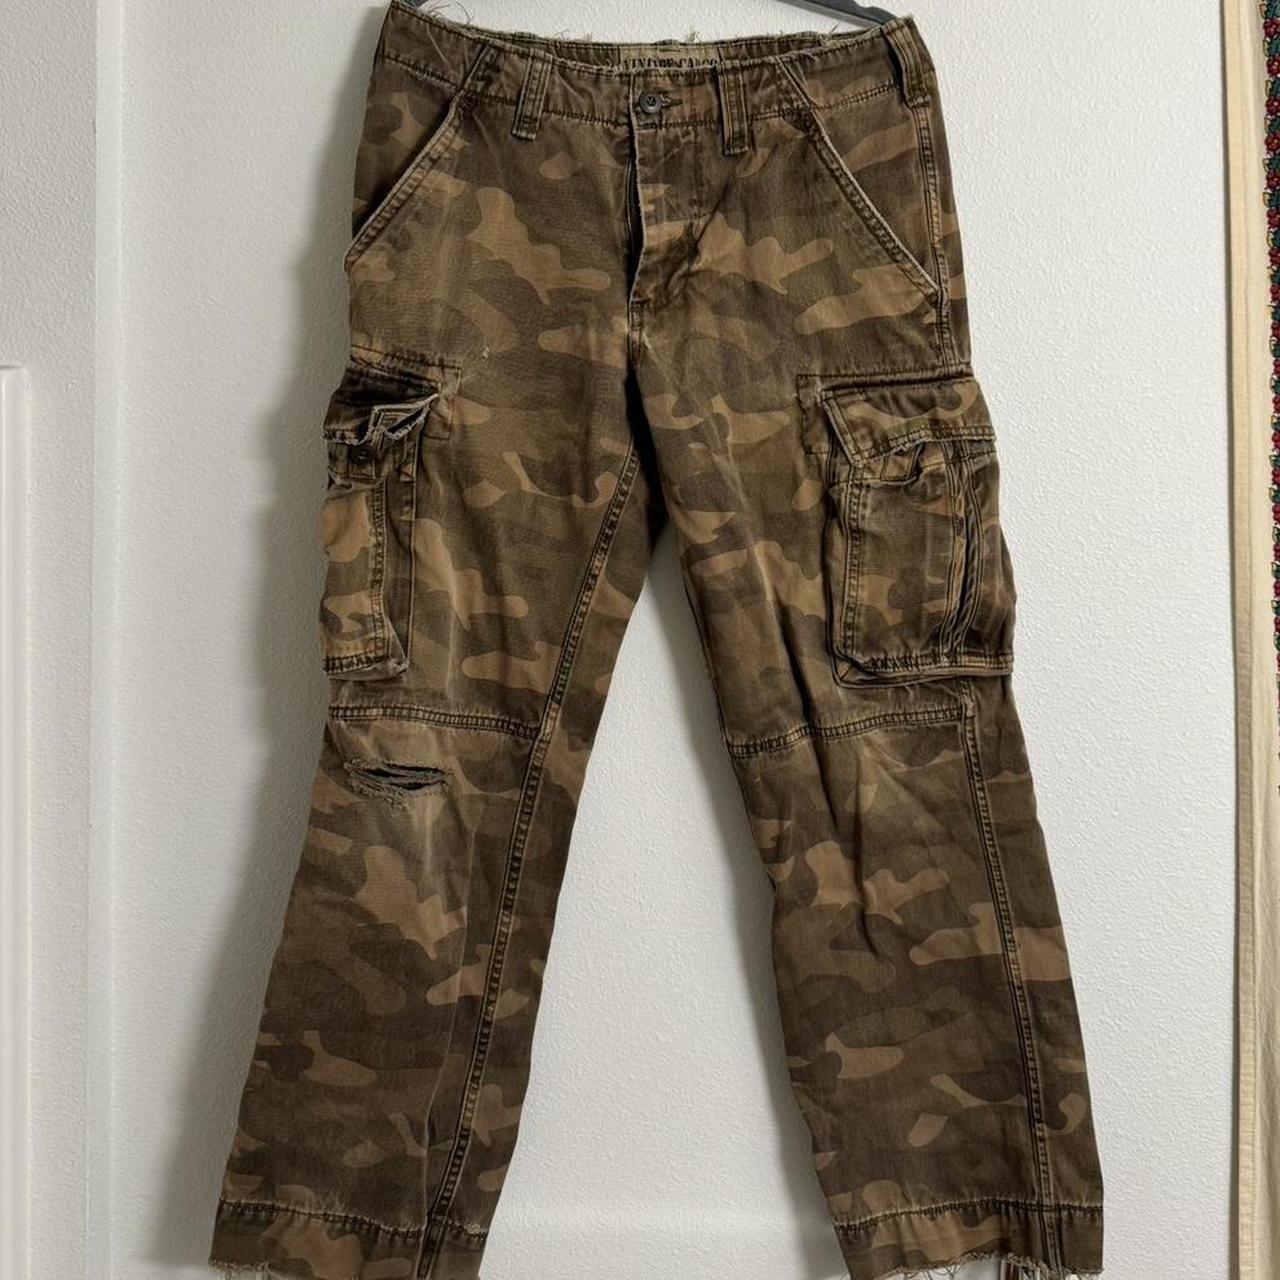 Cargo camo pants with a great fade and wear + tear - Depop